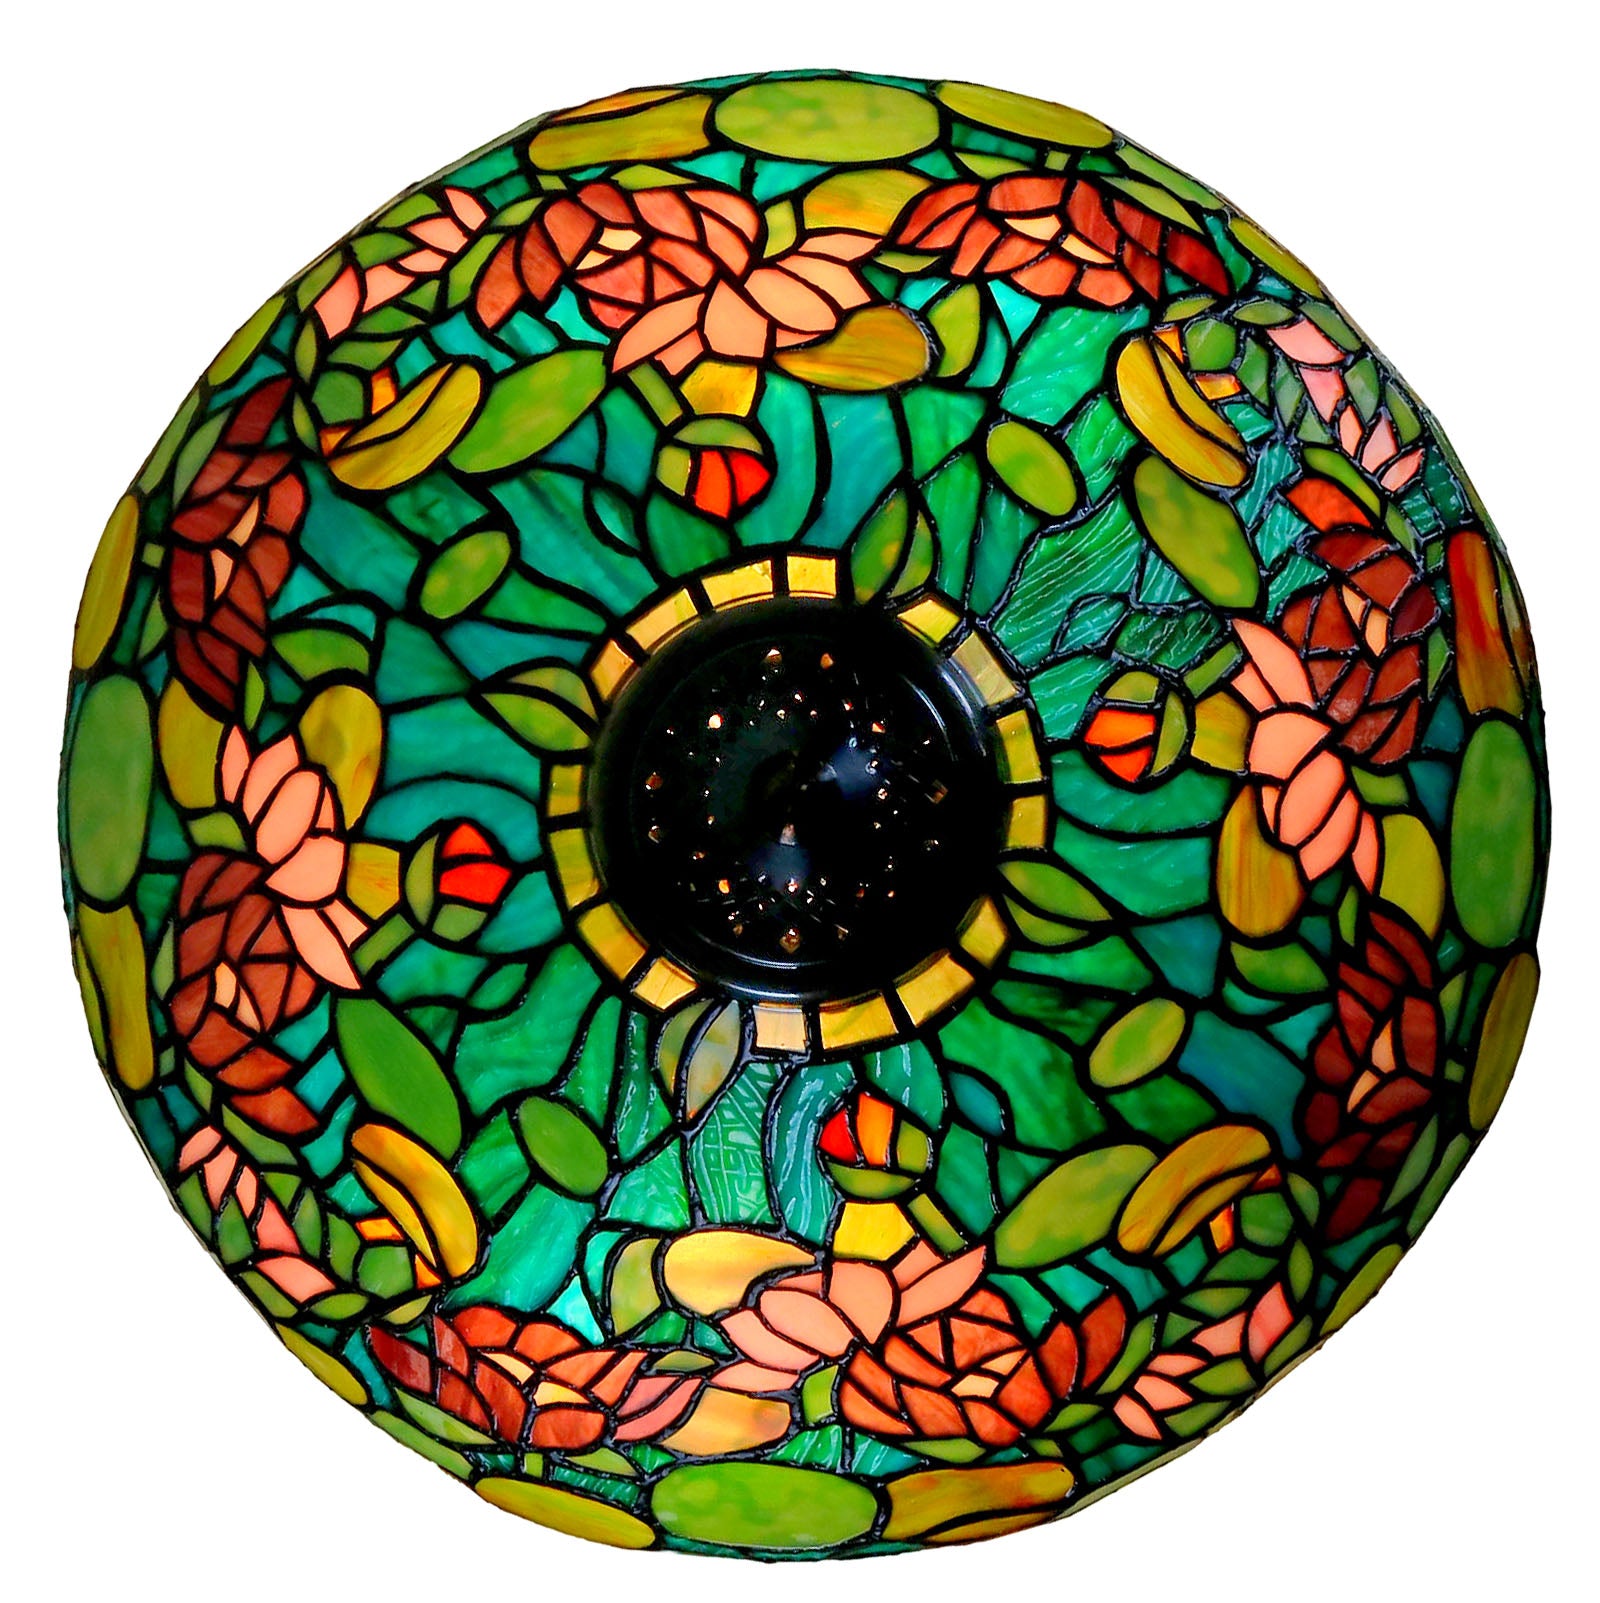 Legend Collection@ Large 16" Pond Lily Stained Glass Tiffany Table Lamp